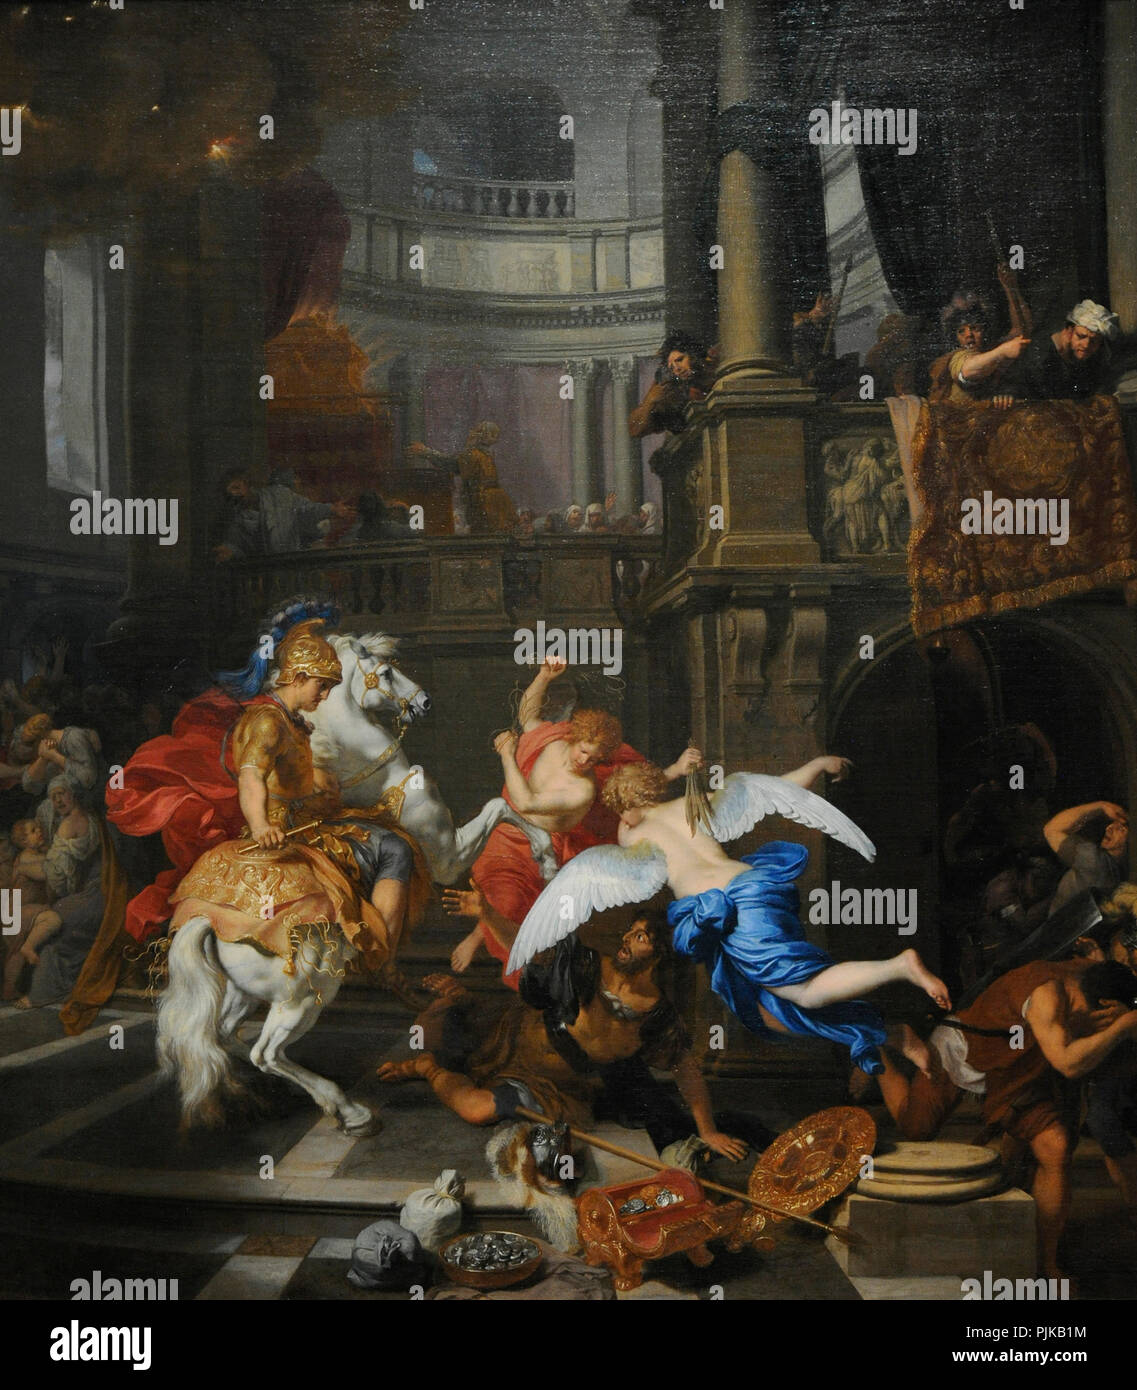 Gerard de Lairesse (1640-1711). Dutch painter. Expulsion of Heliodorus from the Temple, 1674. Wallraf-Richartz Museum. Cologne. Germany. Stock Photo